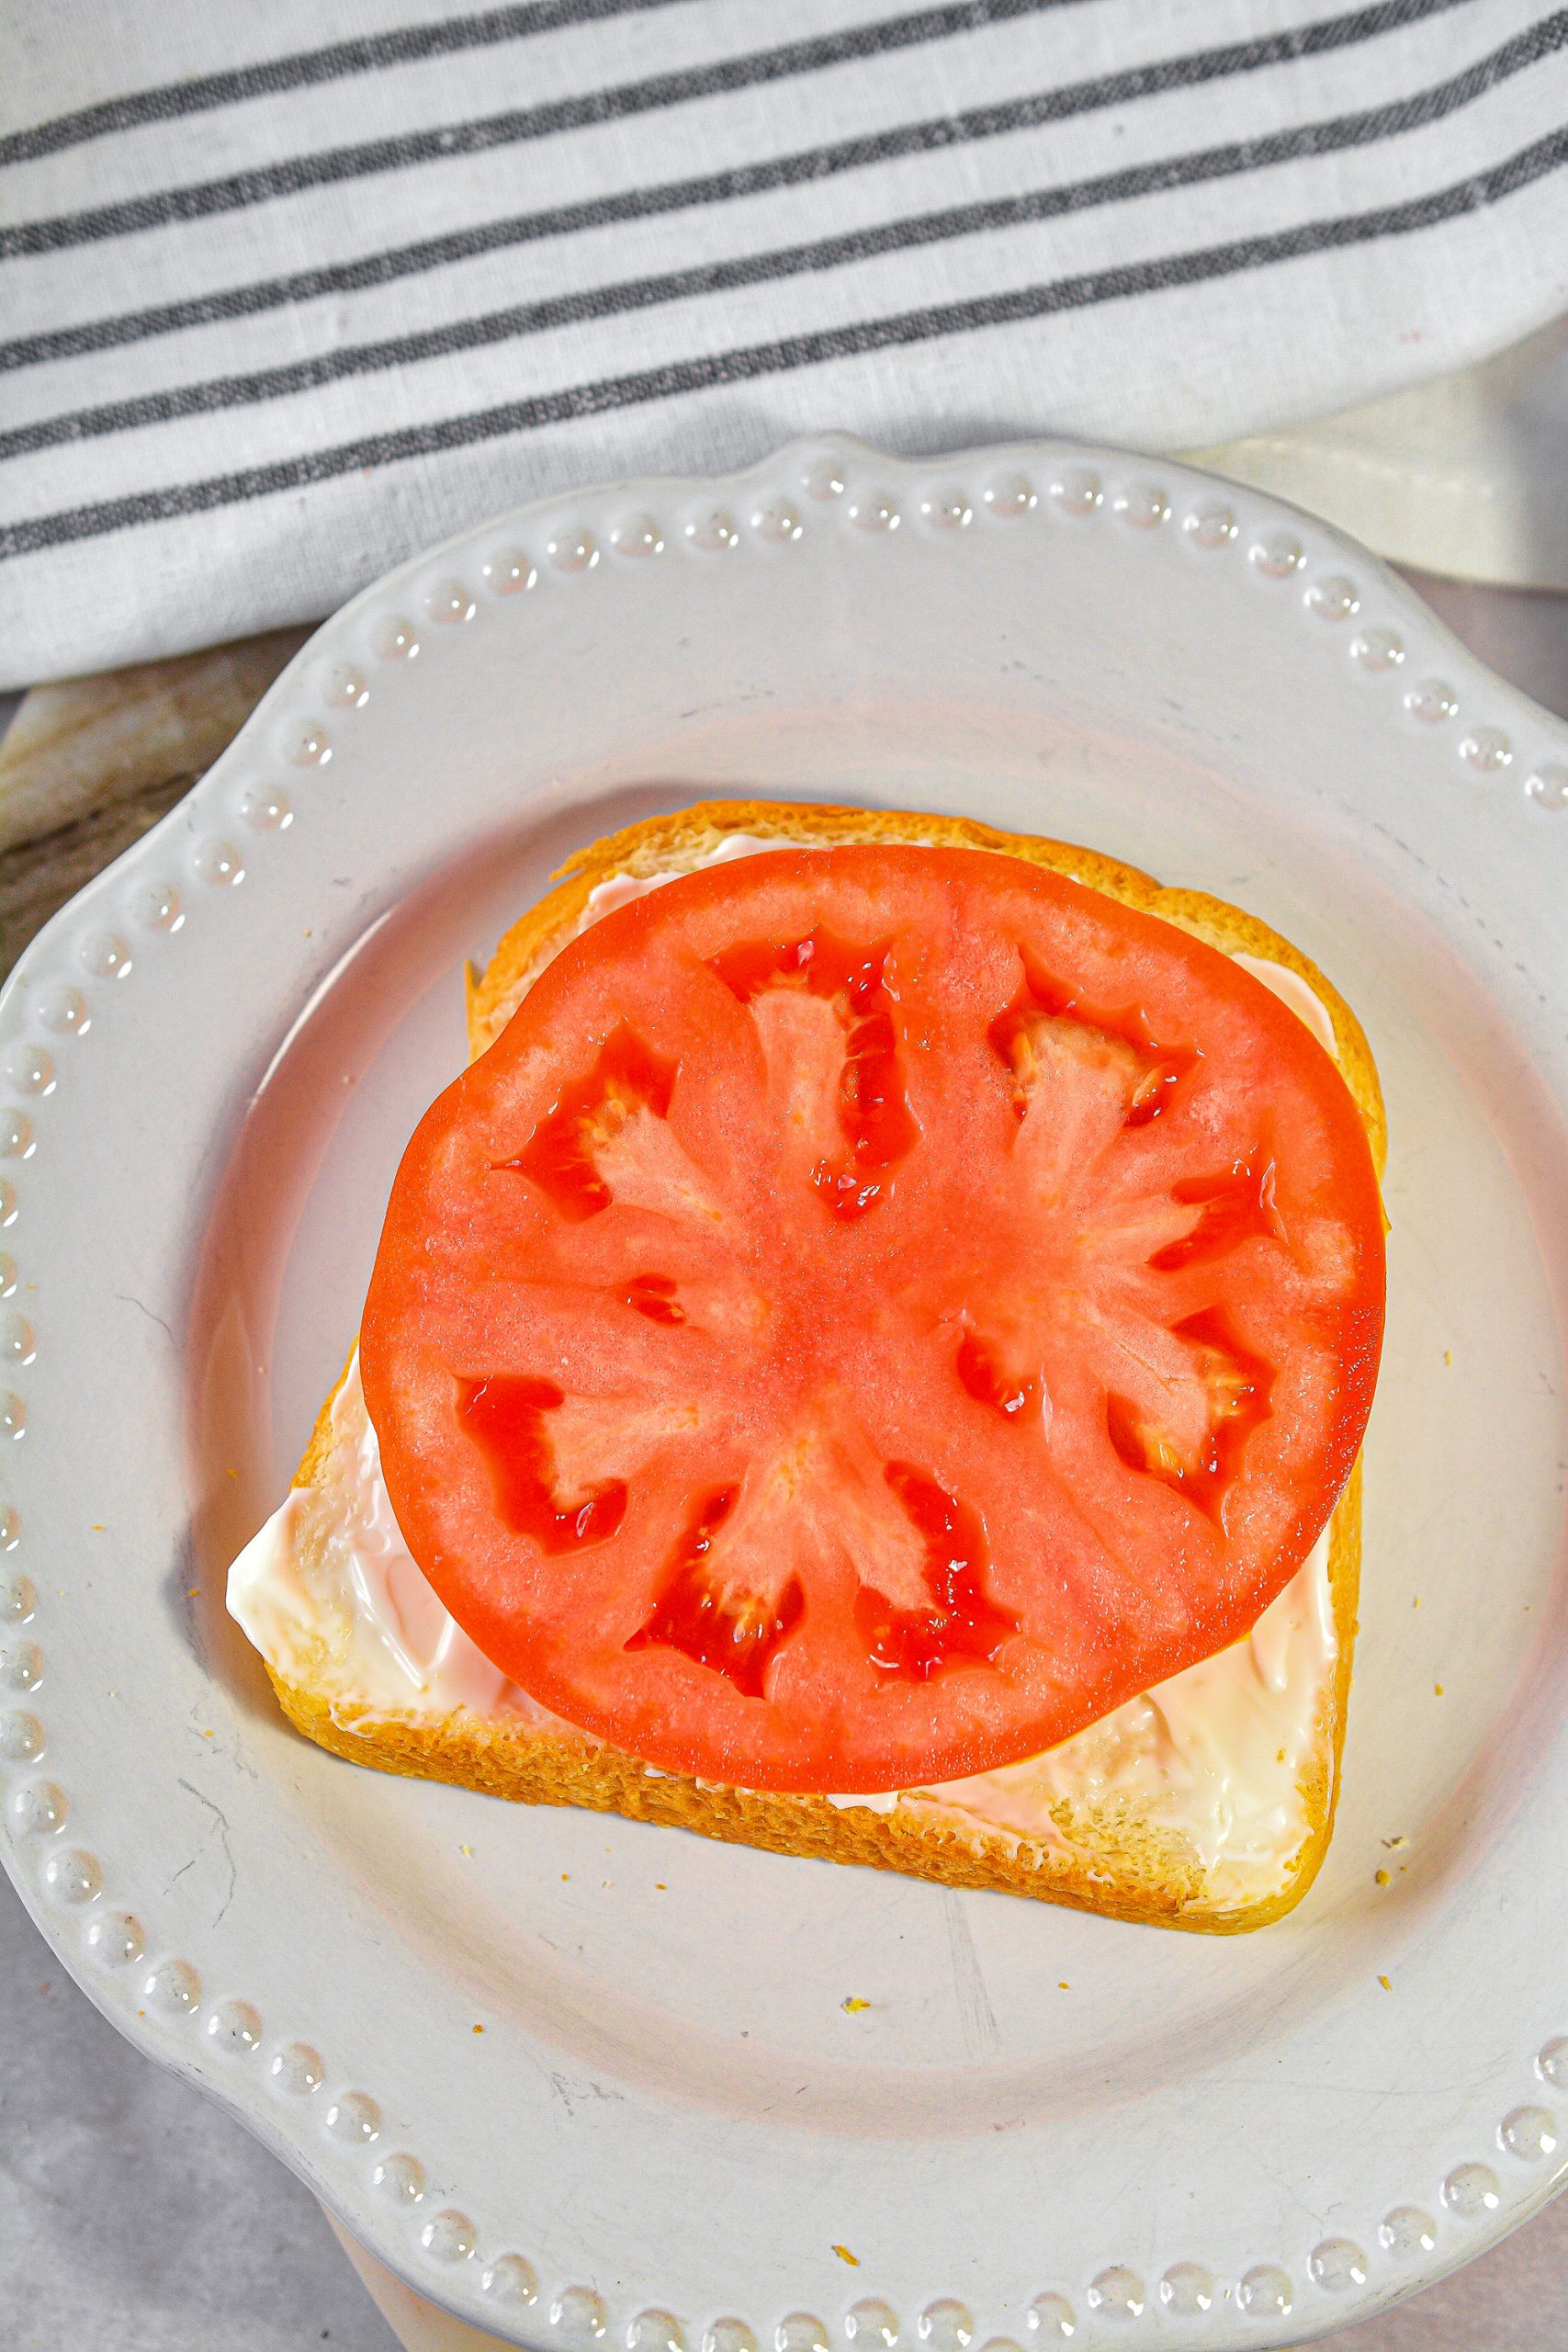 Place a slice of tomato on top of the slices of bread with the mayo.